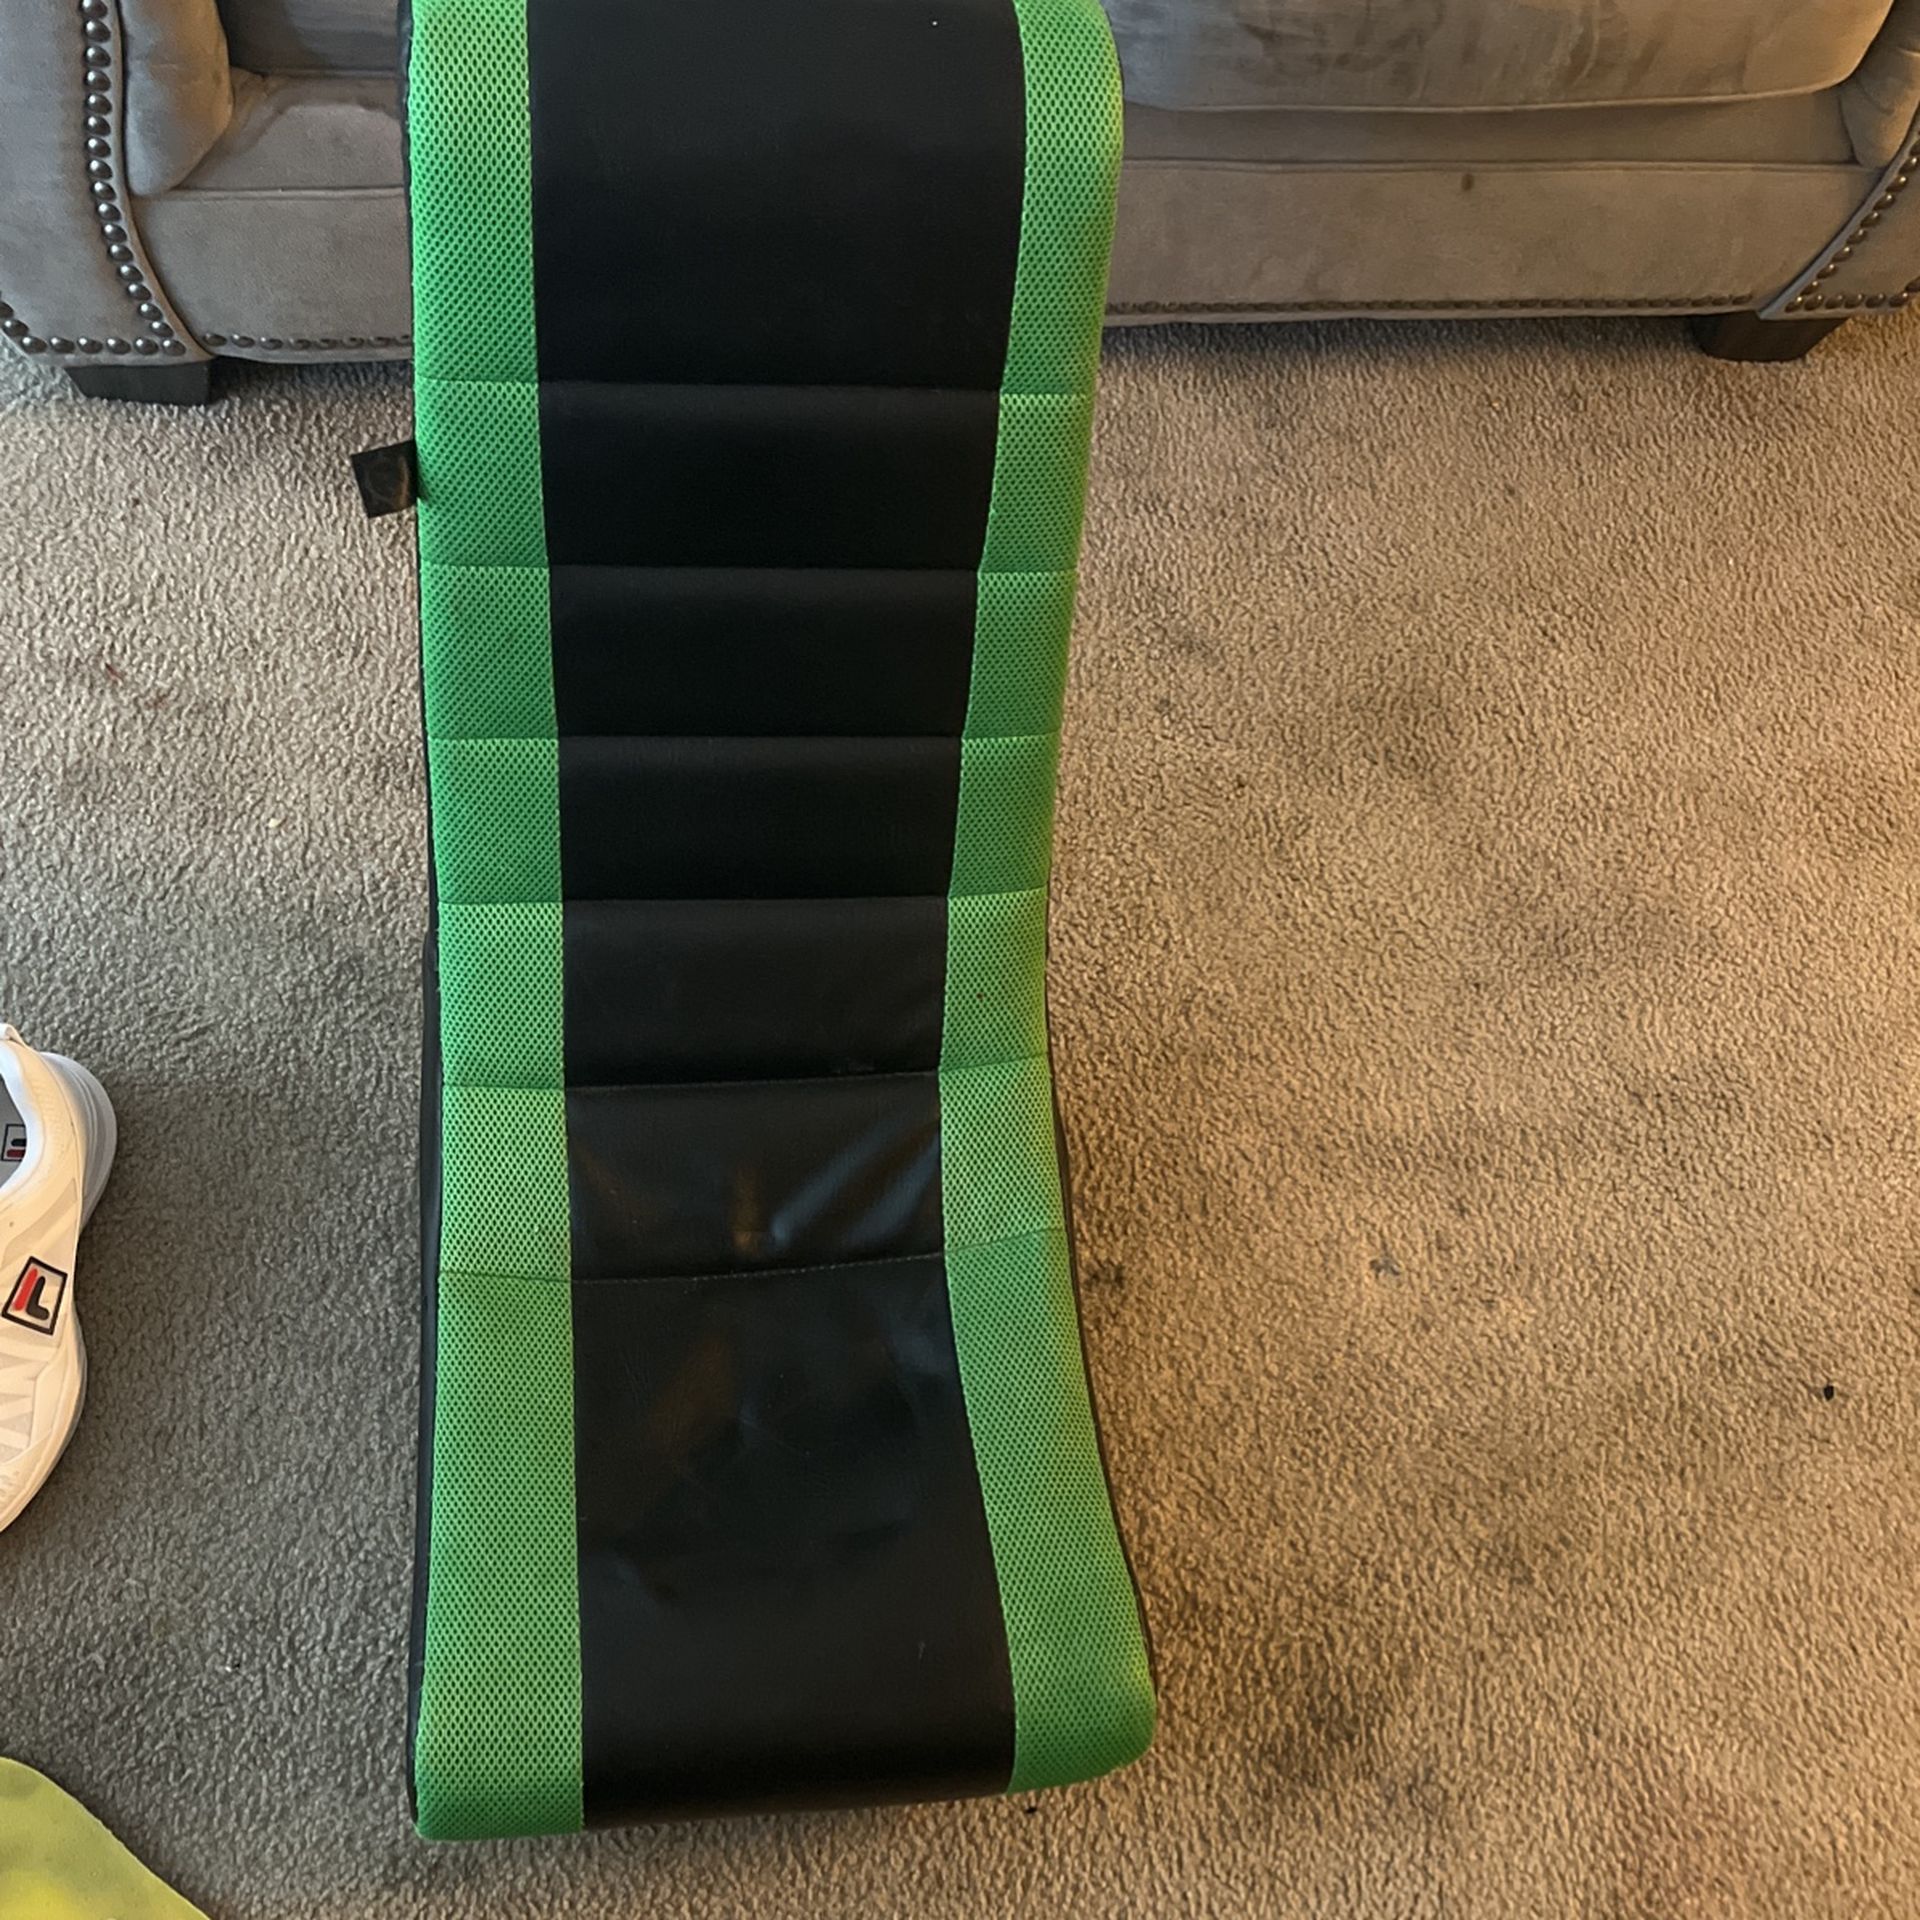 Game Chair For Kids